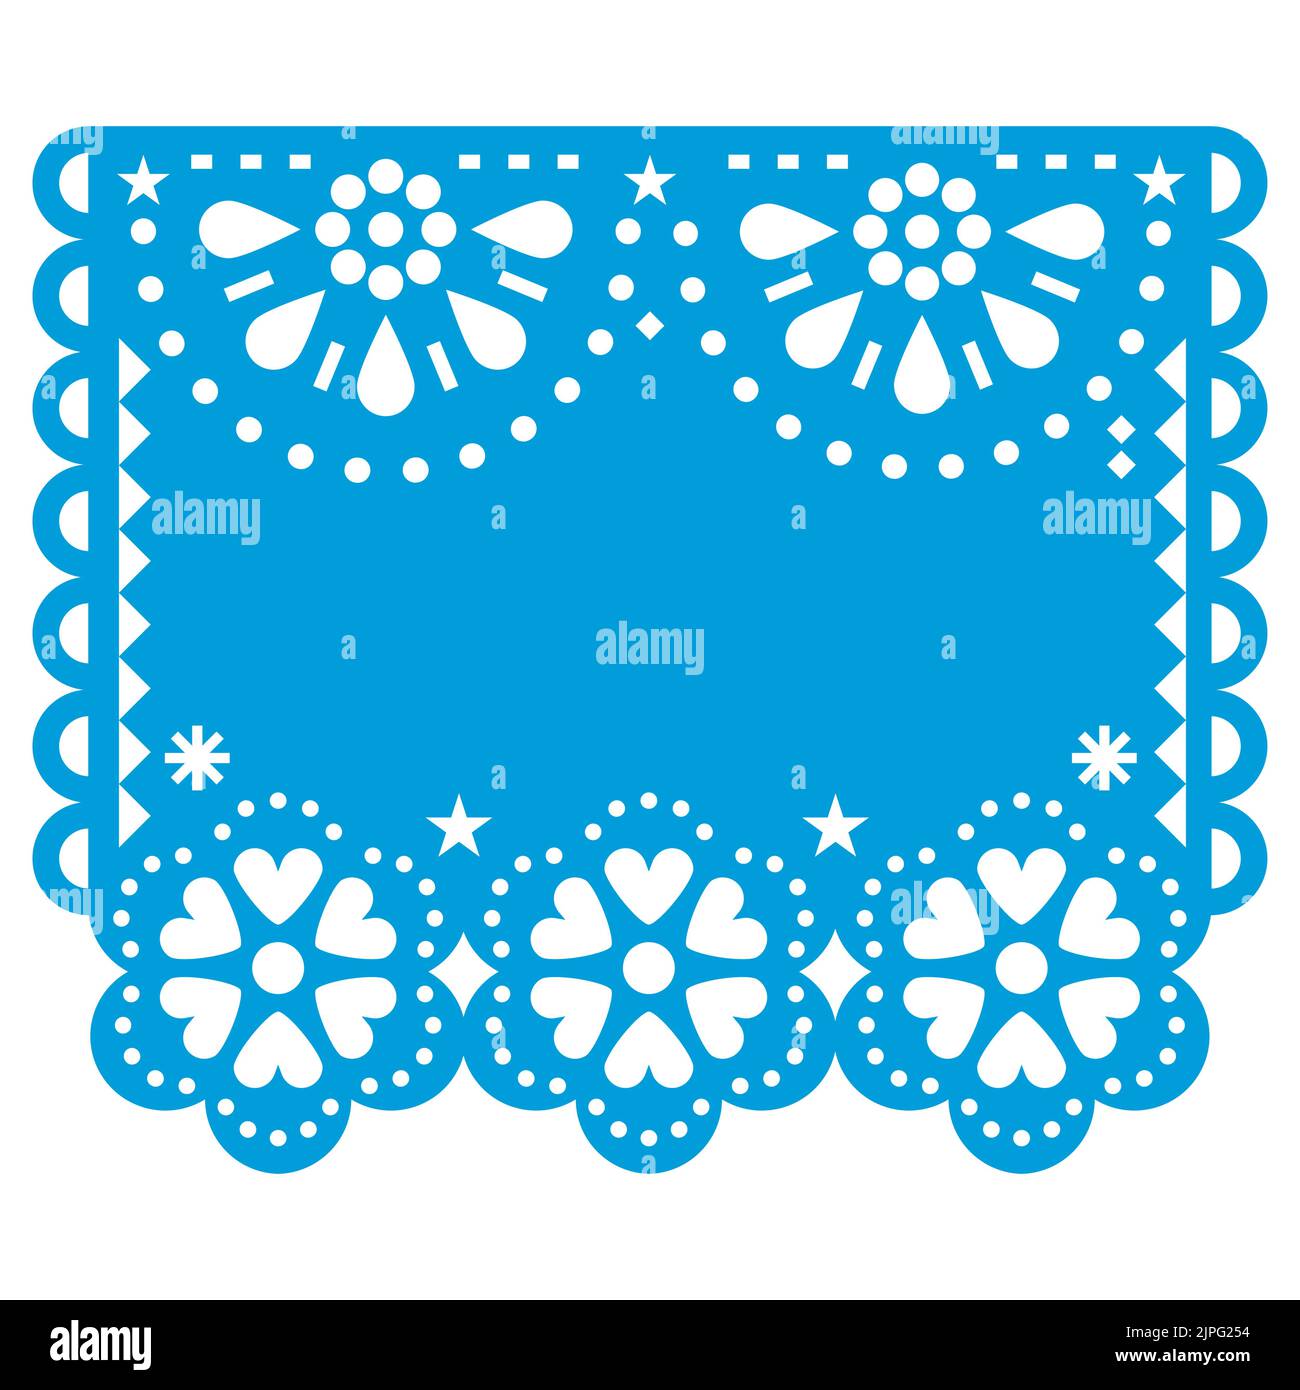 Papel Picado vector template design with blank space for text inspired by traditional cut out decoration from Mexico Stock Vector